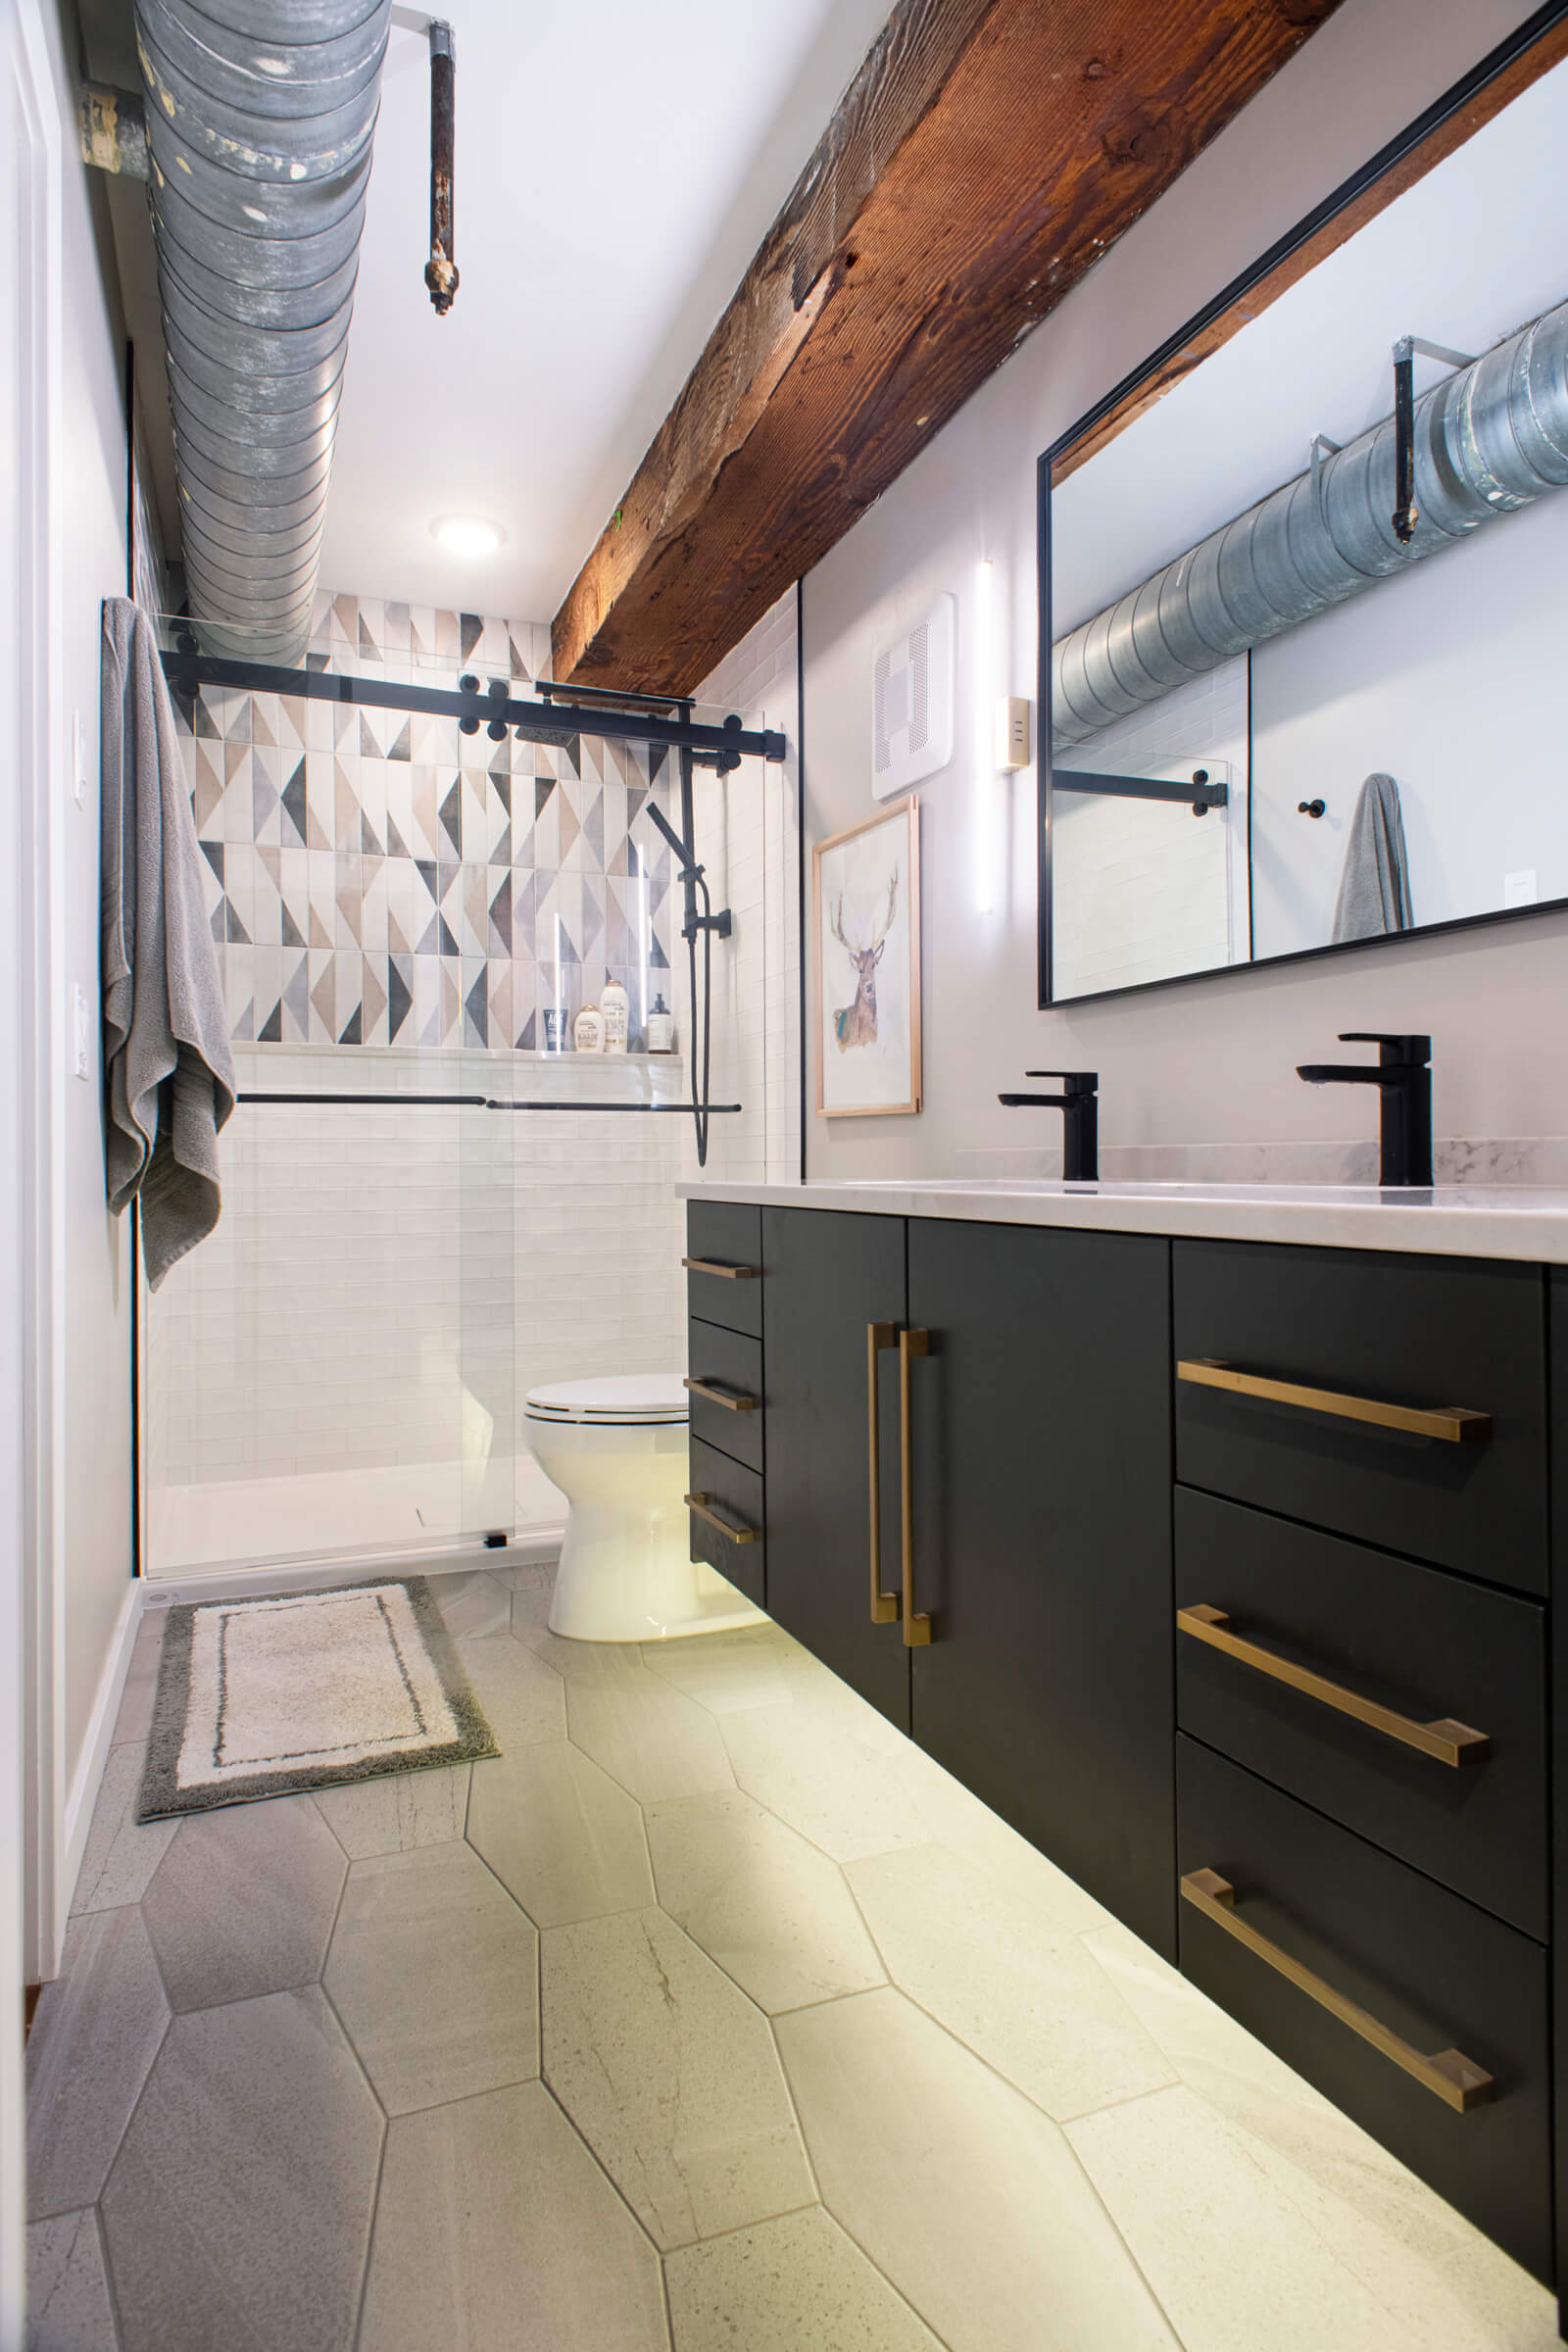 An industrial styled master bathroom design with dual sinks in a black finish, a white vanity countertop, and black painted floating bath cabinets with brushed brass hardware pulls. An industrial-like air duck pipe and a railroad tie-inspired ceiling beam add to the industrial style of the bathroom design.